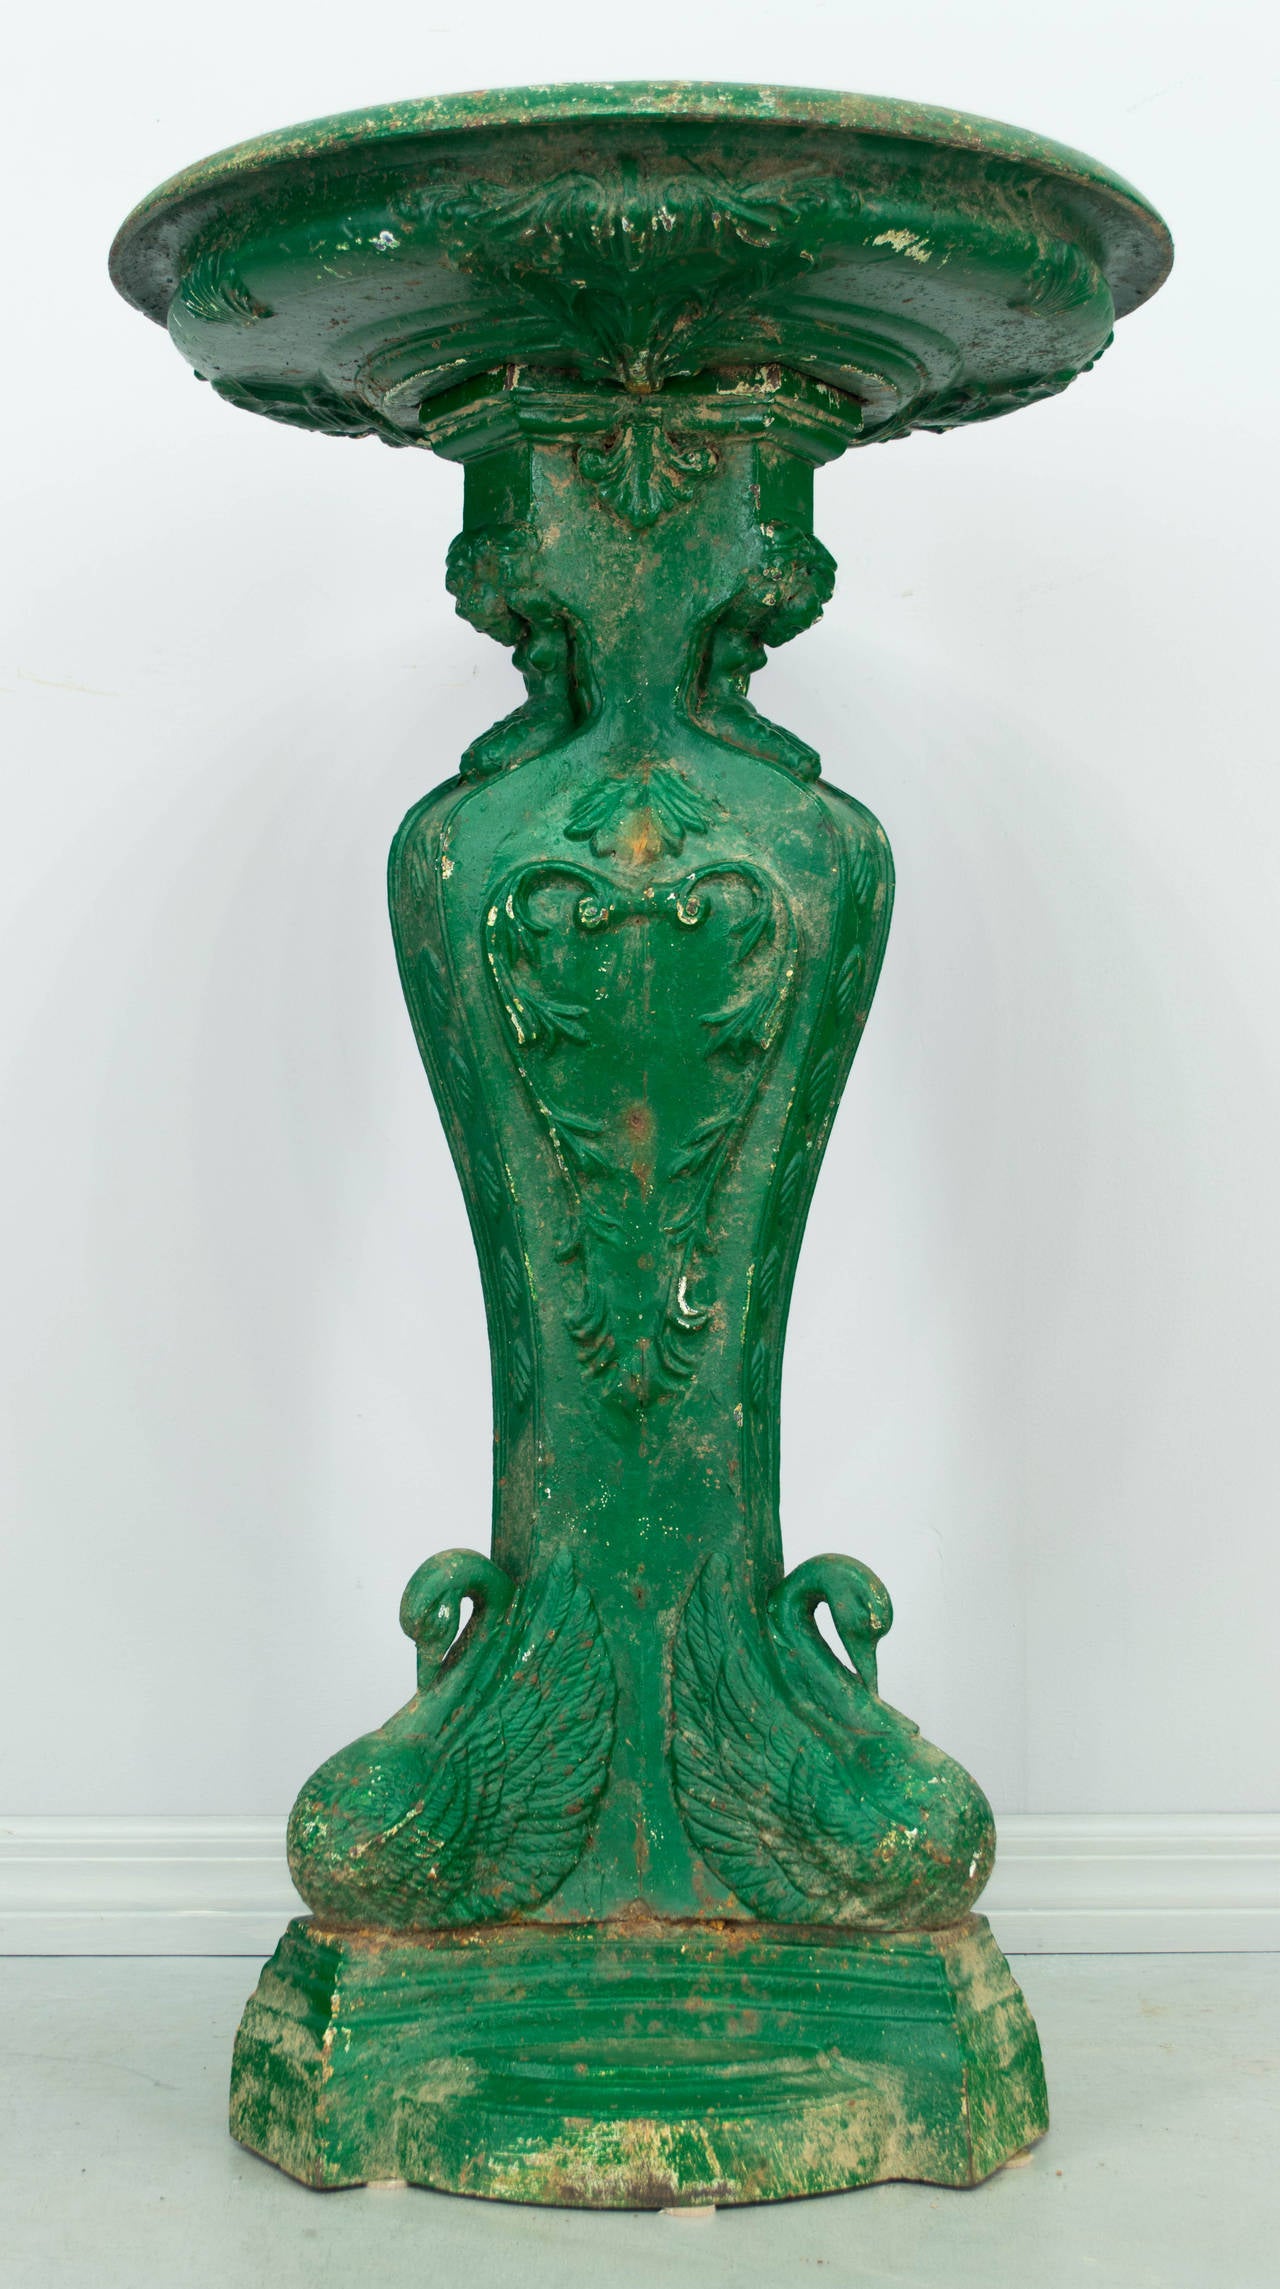 19th century French cast iron bird bath with old green painted patina. In two pieces with basin resting on pedestal. A trio of swans decorates the base. Total weight is 200 lbs. 
More photos available upon request. Please visit our showroom in